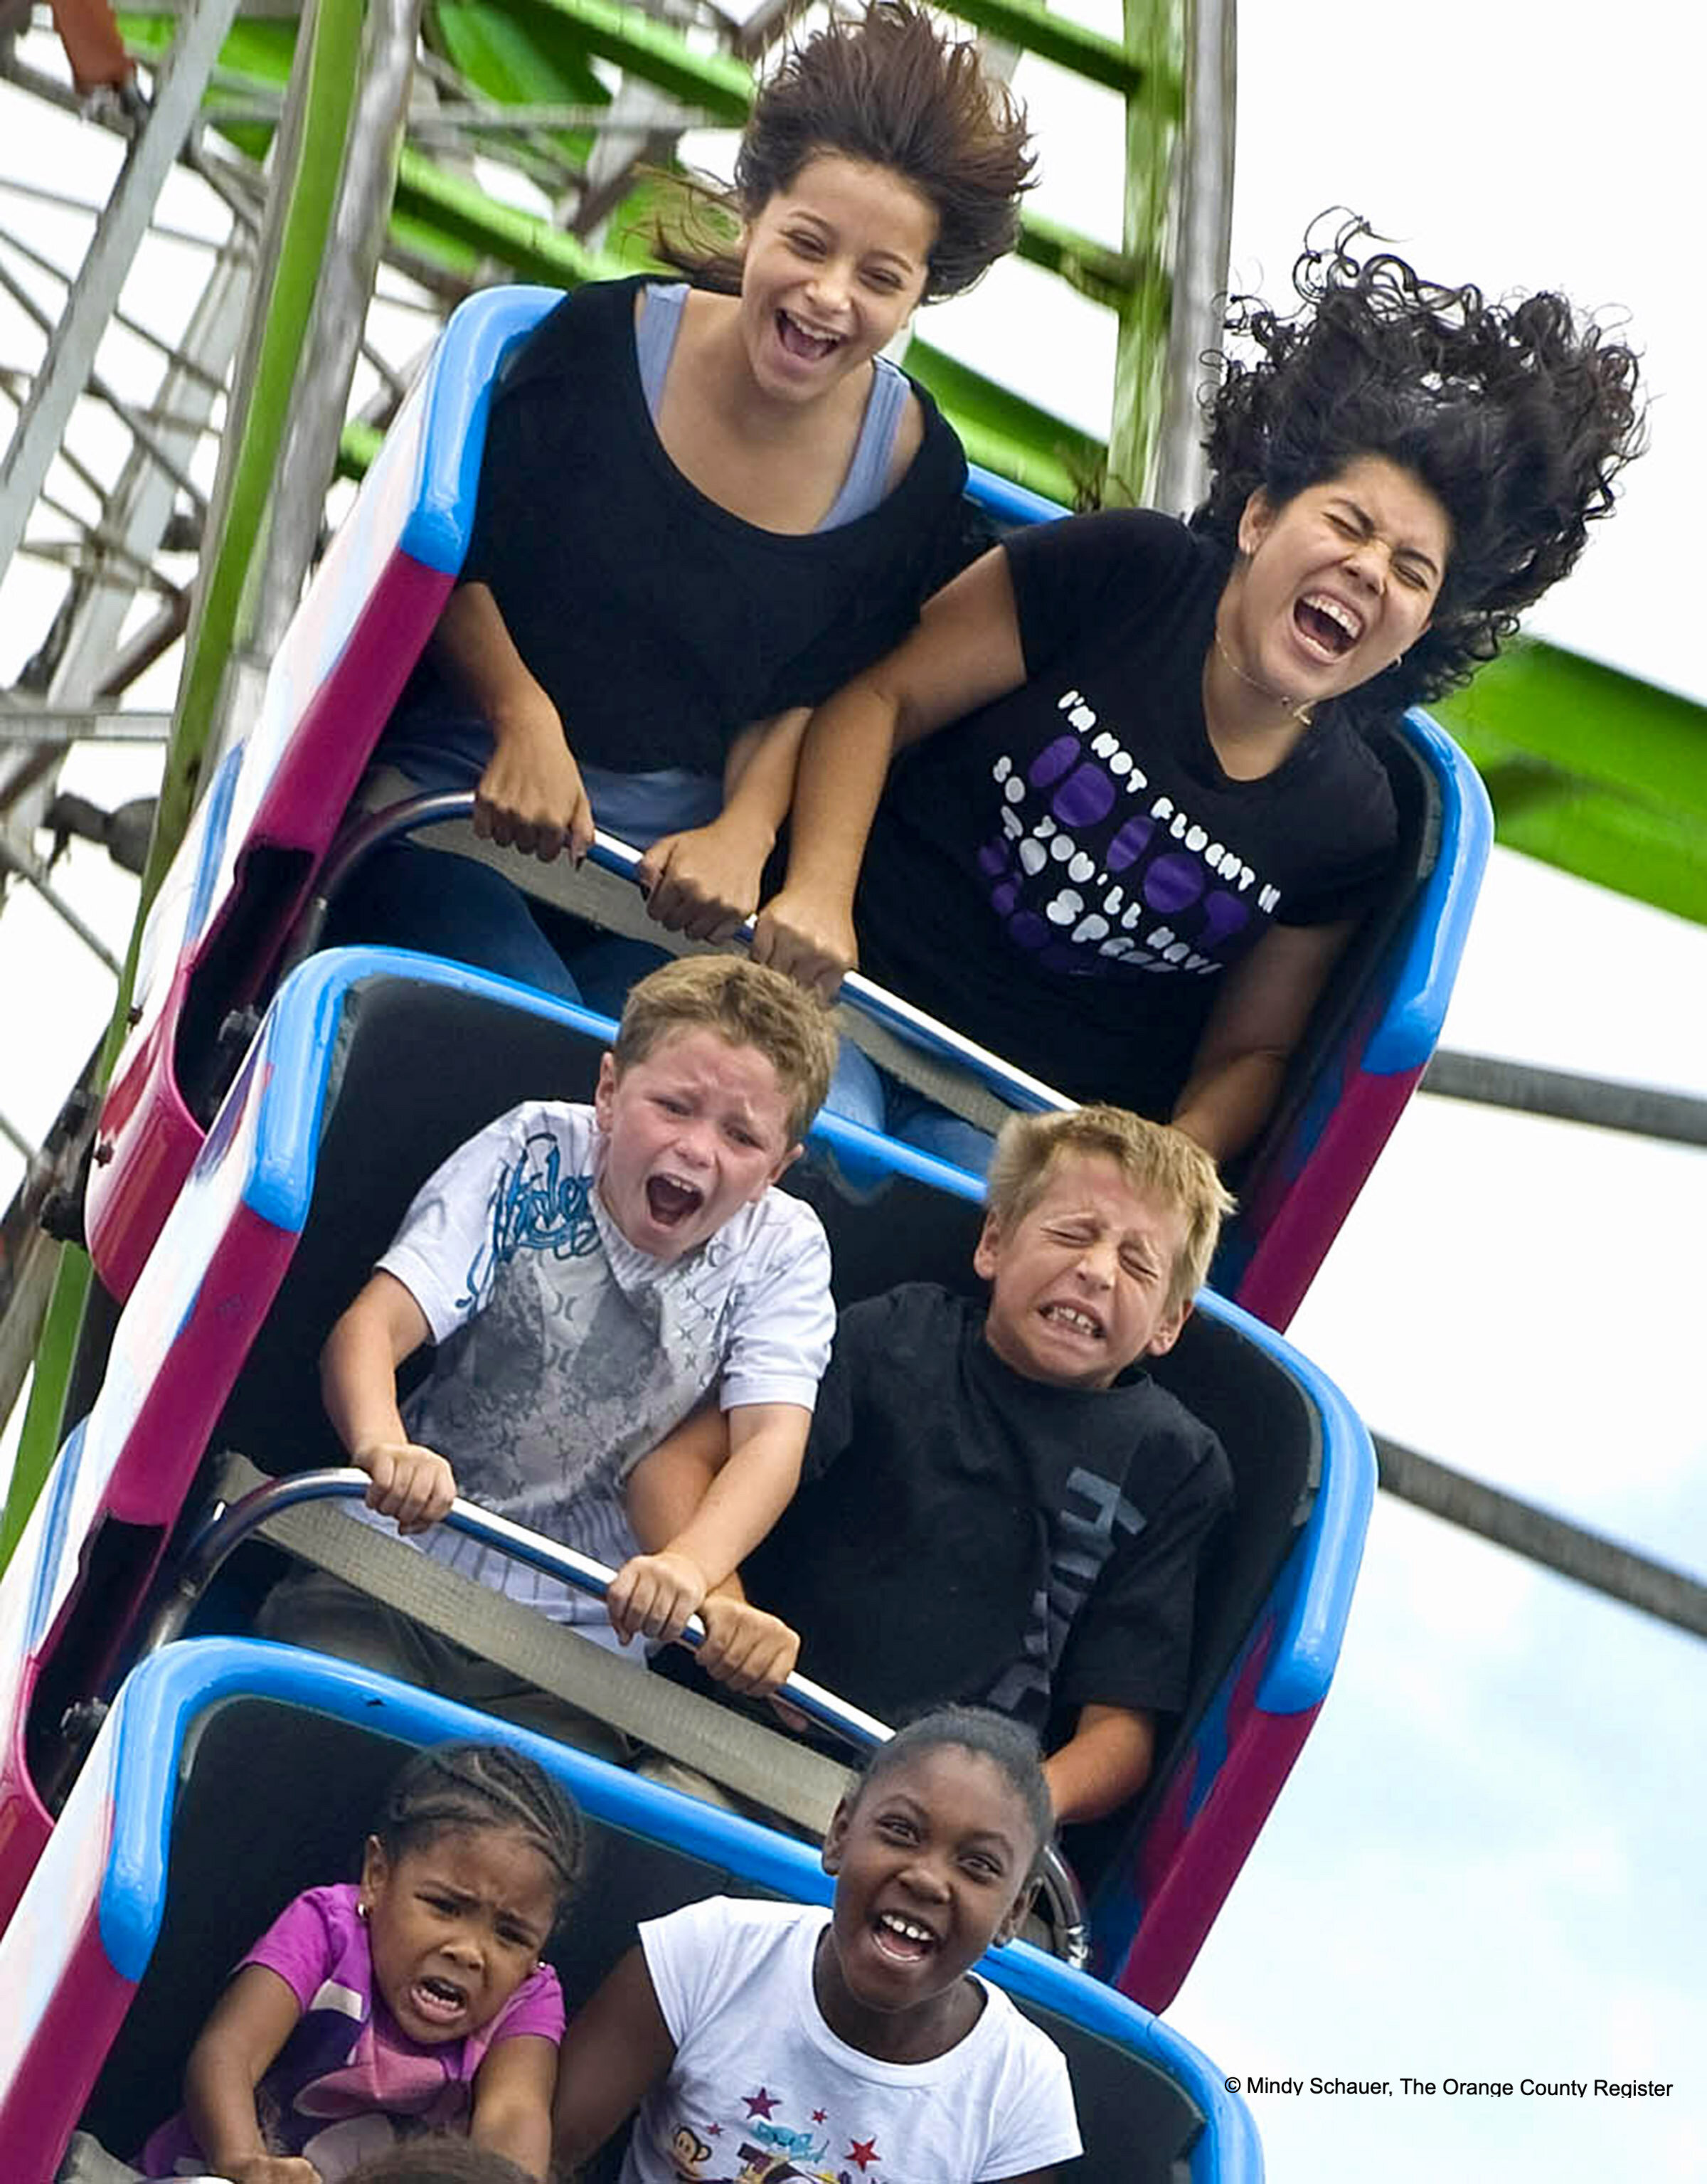  NEWPORT BEACH, CA - OCTOBER 31: Riders on the Hi-Miler get their thrills at the OC Fair Sunday. Officials say they are seeing 20 to 25 percent increases in attendance at the mid-point compared to last year.  